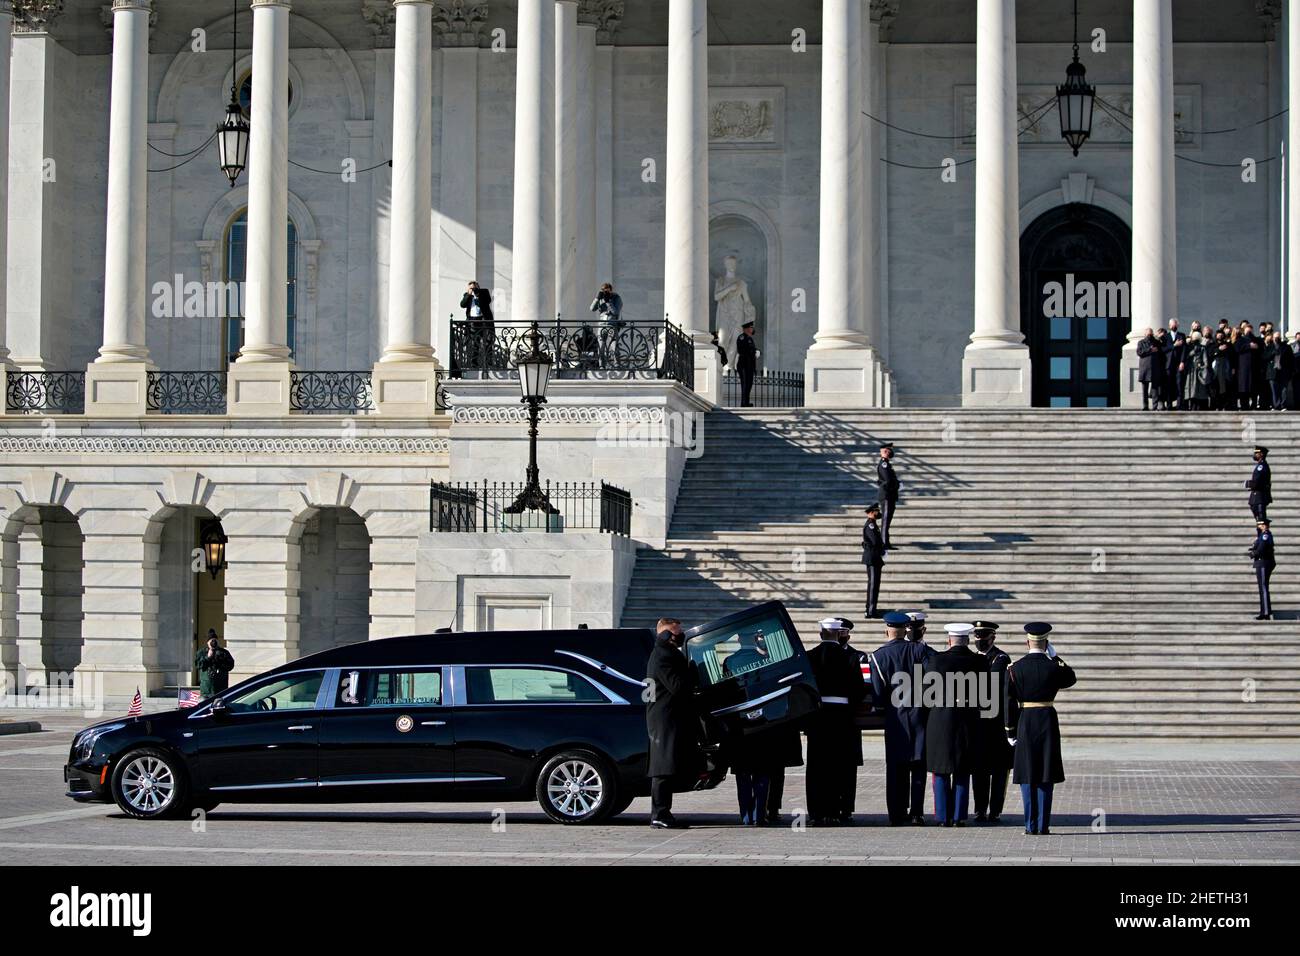 The casket of late Senator Harry Reid, bottom center, arrives to the U.S. Capitol before a ceremony in Washington, DC, U.S., on Wednesday, Jan. 12, 2022. Reid, the Democratic U.S. Senate majority leader who helped implement President Obama's legislative agenda by rounding up votes to pass Obamacare, died at 82 on Dec. 28. Credit: Al Drago /Pool via CNP /MediaPunch Stock Photo